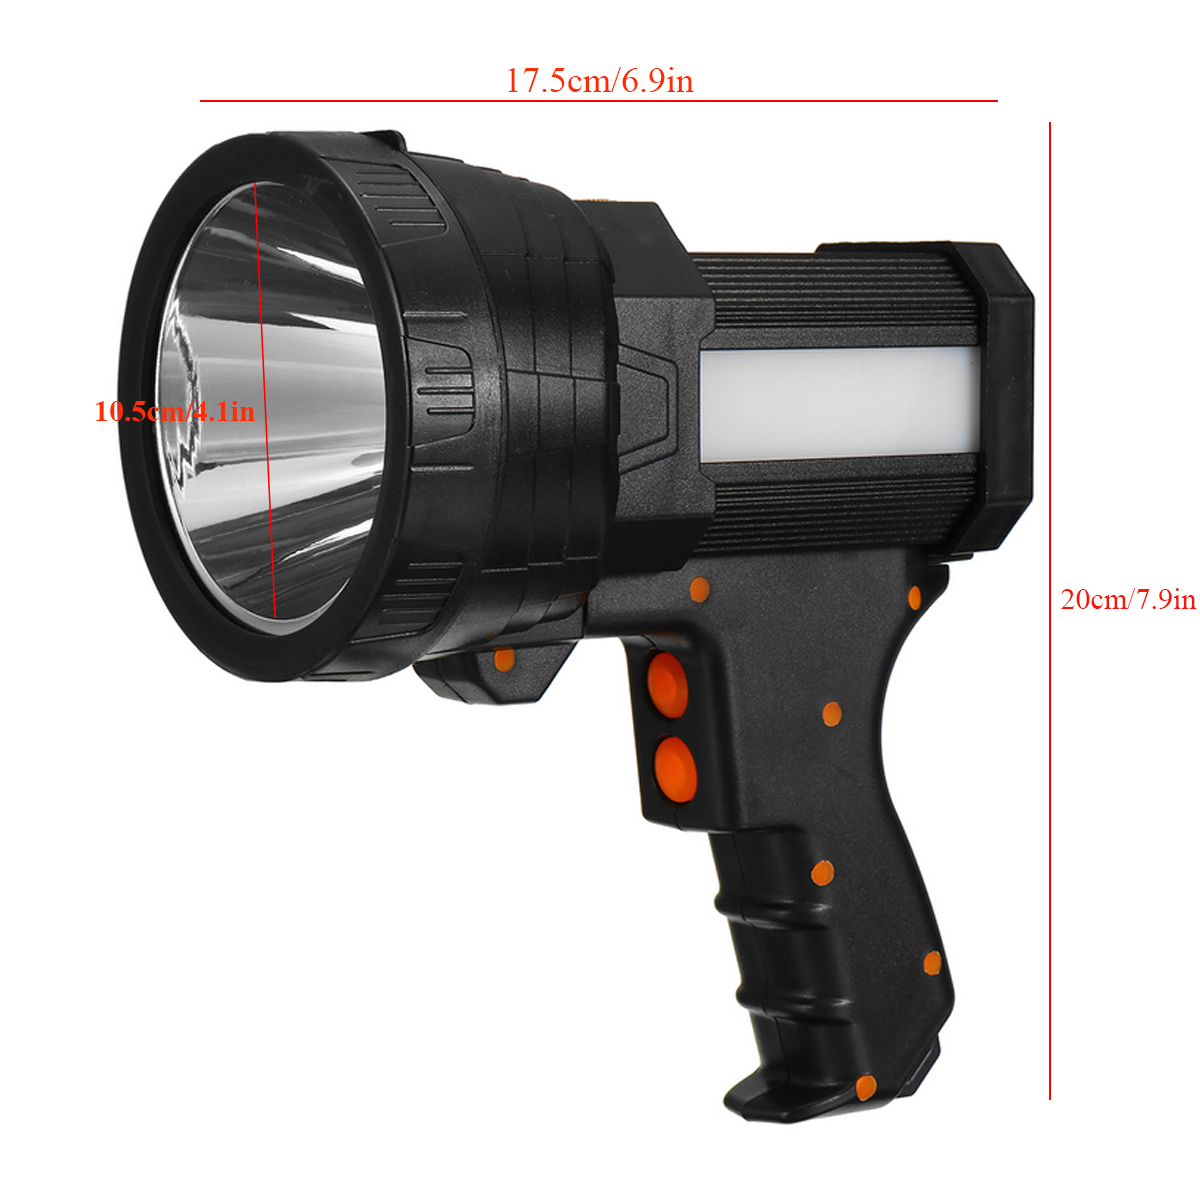 L2-6000LM-500m-Strong-LED-Spotlight-with-Tripod-9600mAh-USB-Rechargeable-Powerful-Searchlight-Portab-1756922